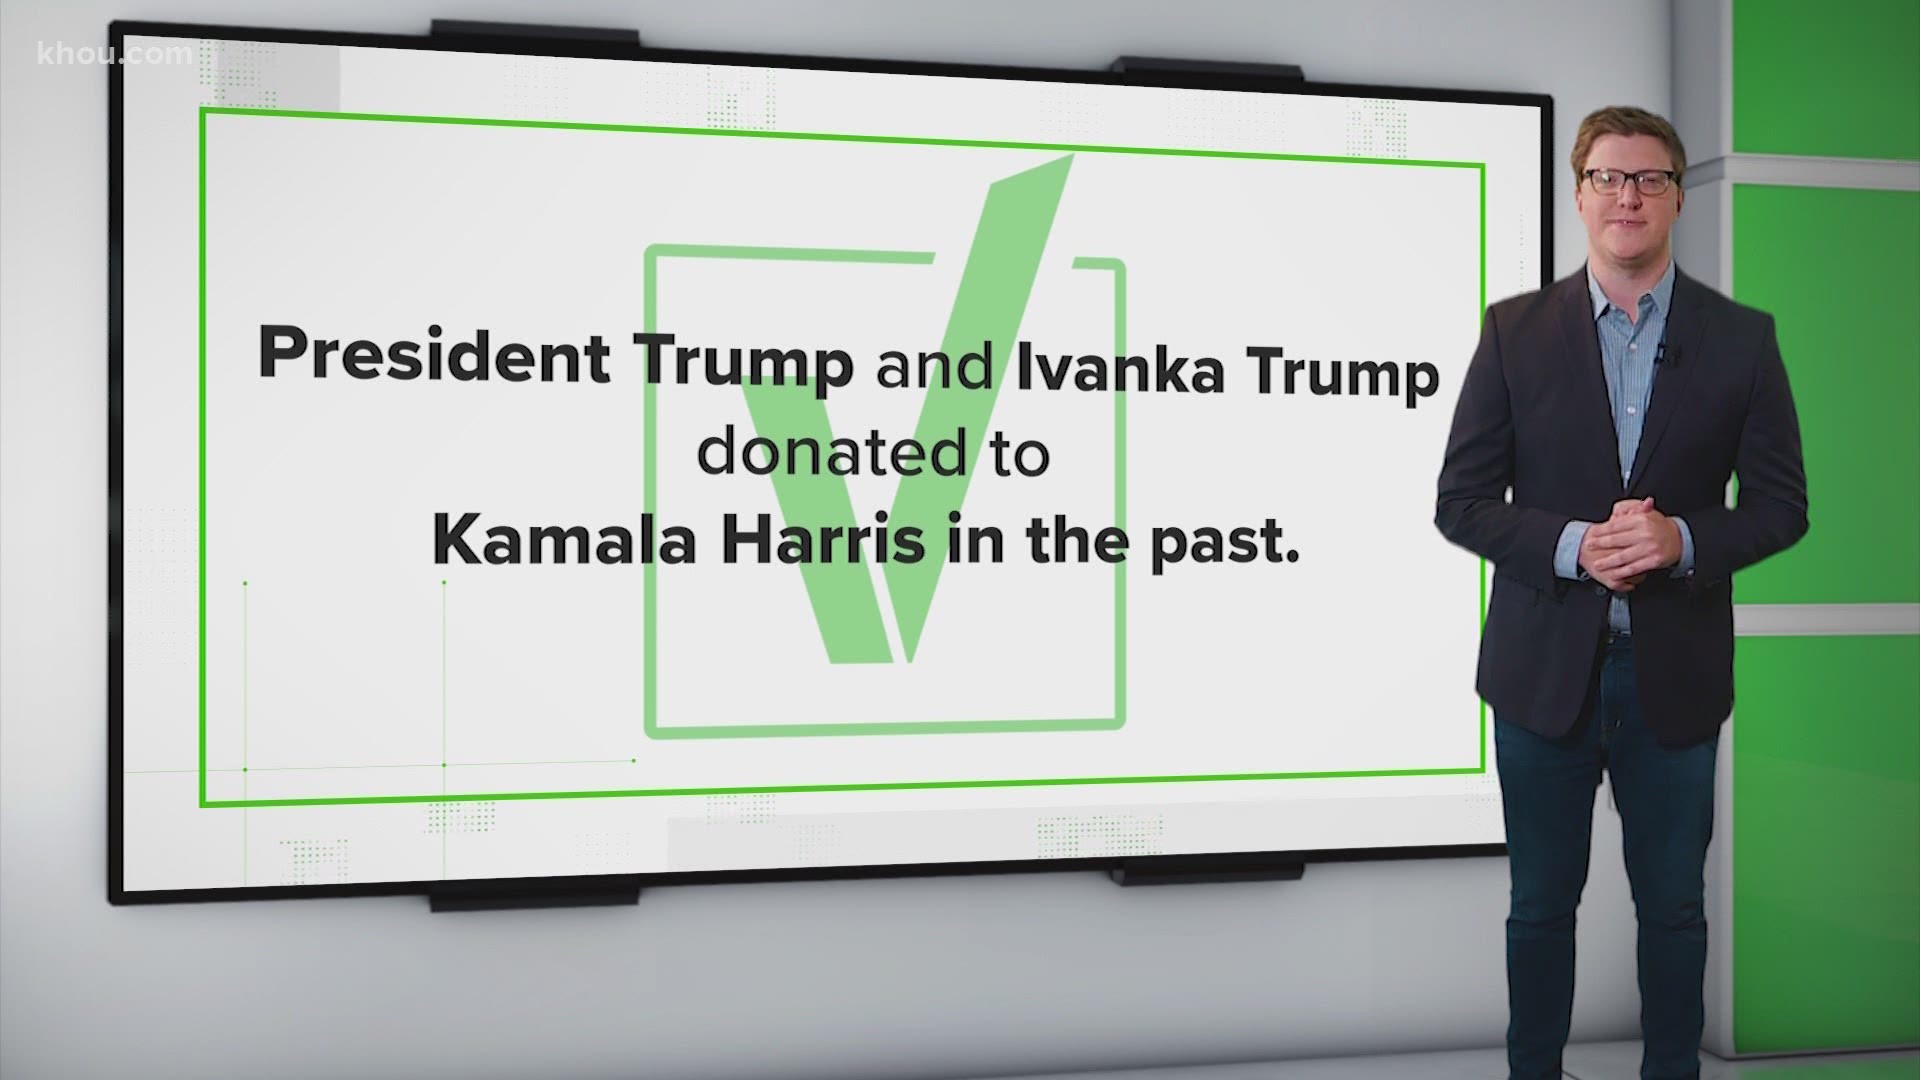 Online records show that President Donald Trump has donated to Kamala Harris' campaign twice.